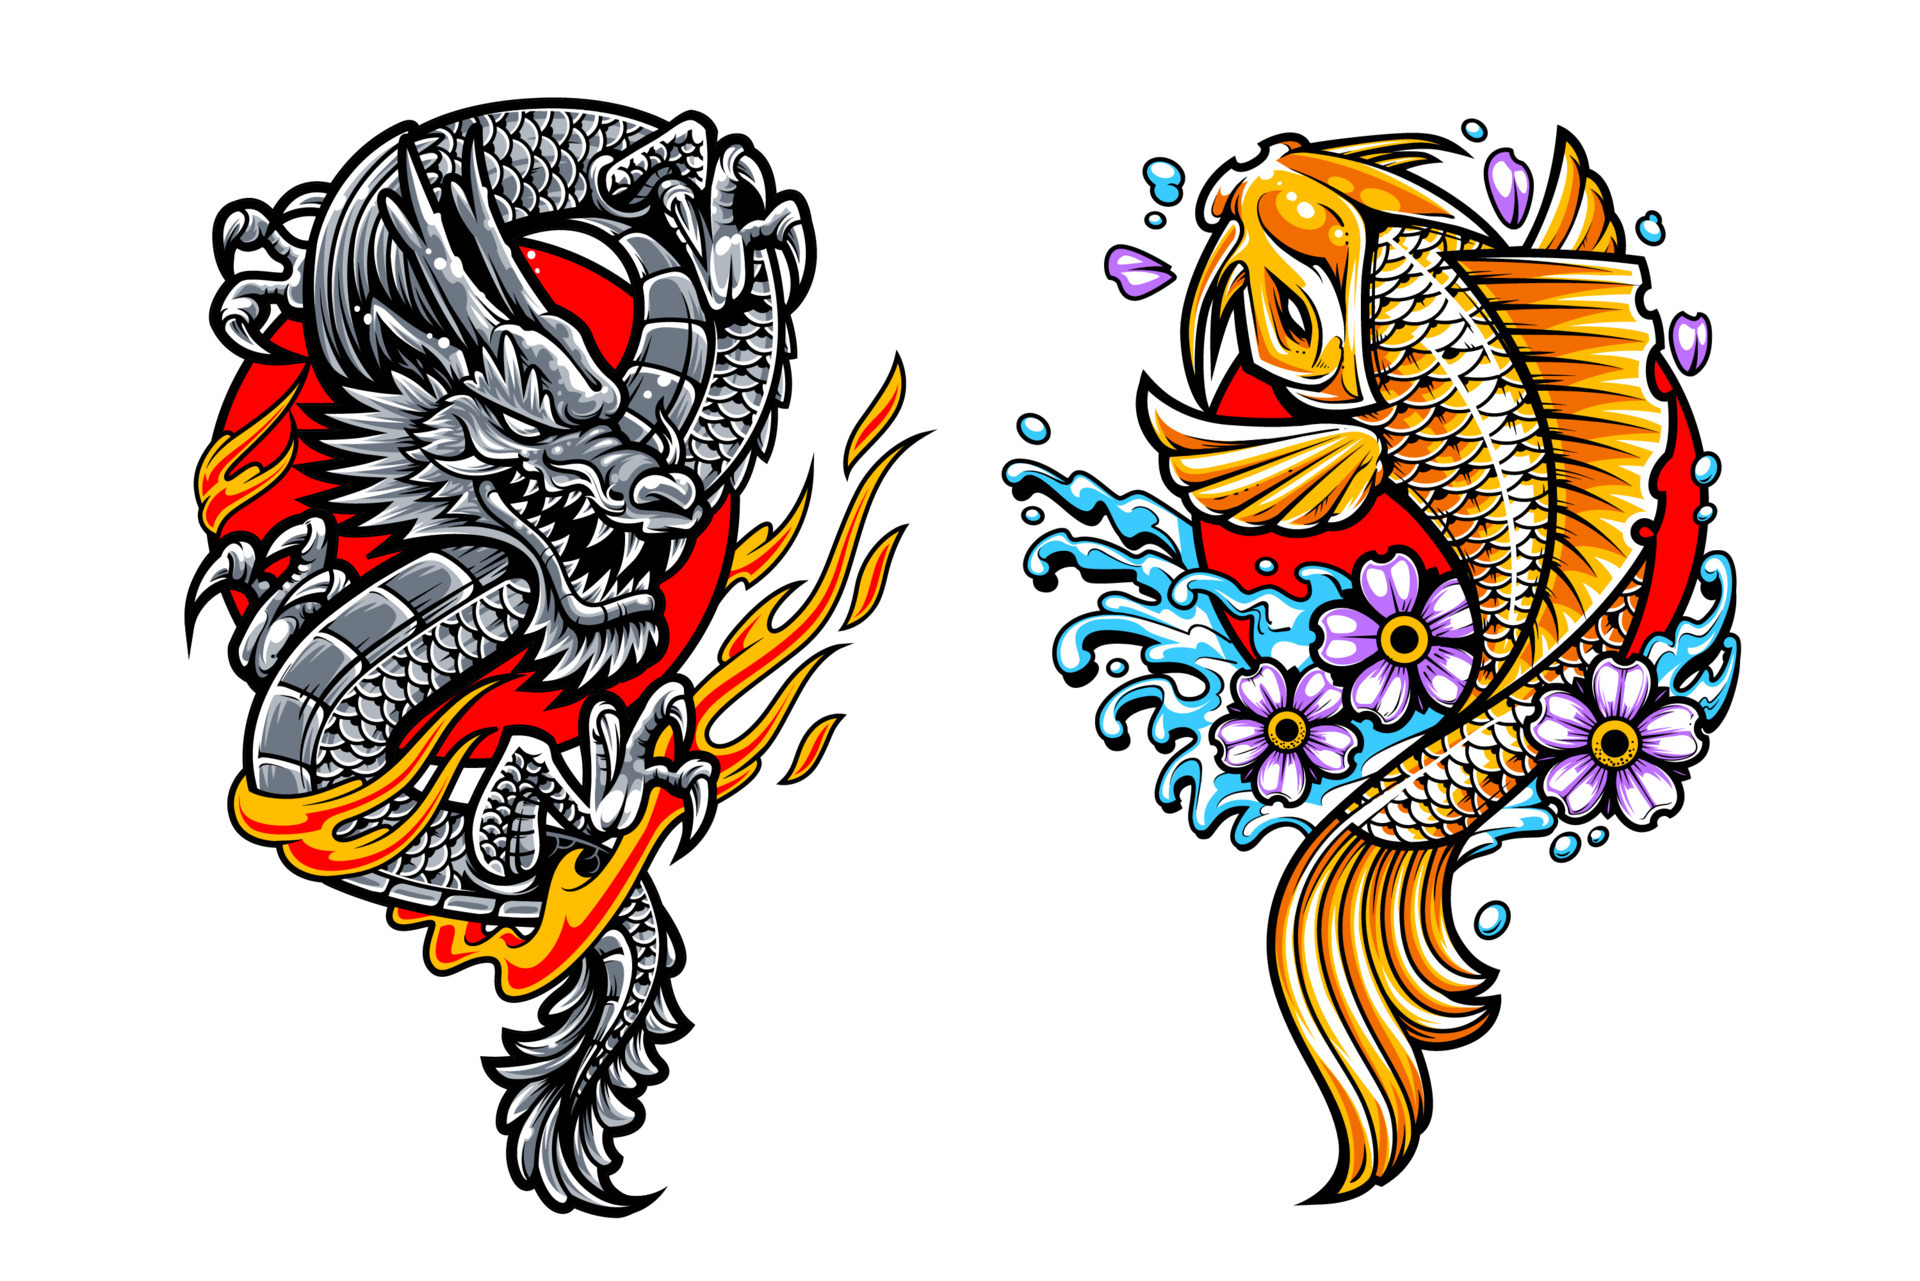 Japanese tattoos  what do they mean Japanese Tattoos Designs  Symbols  Japanese  tattoo meanings